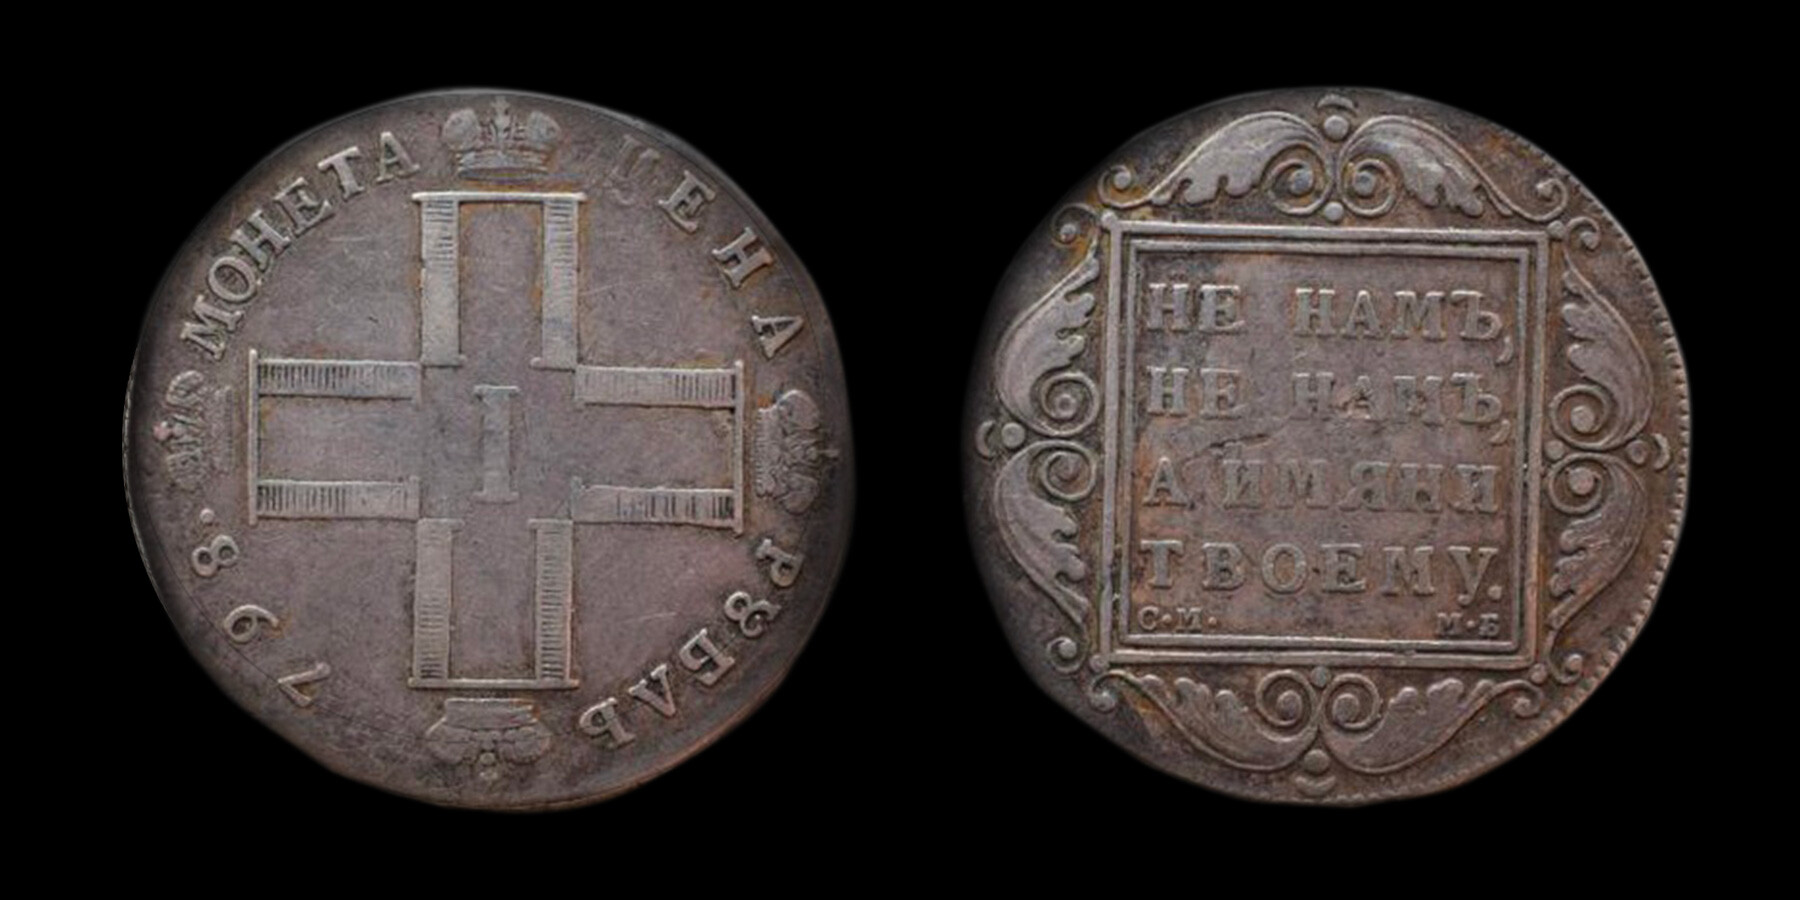 1-ruble coin of Paul I (1789)